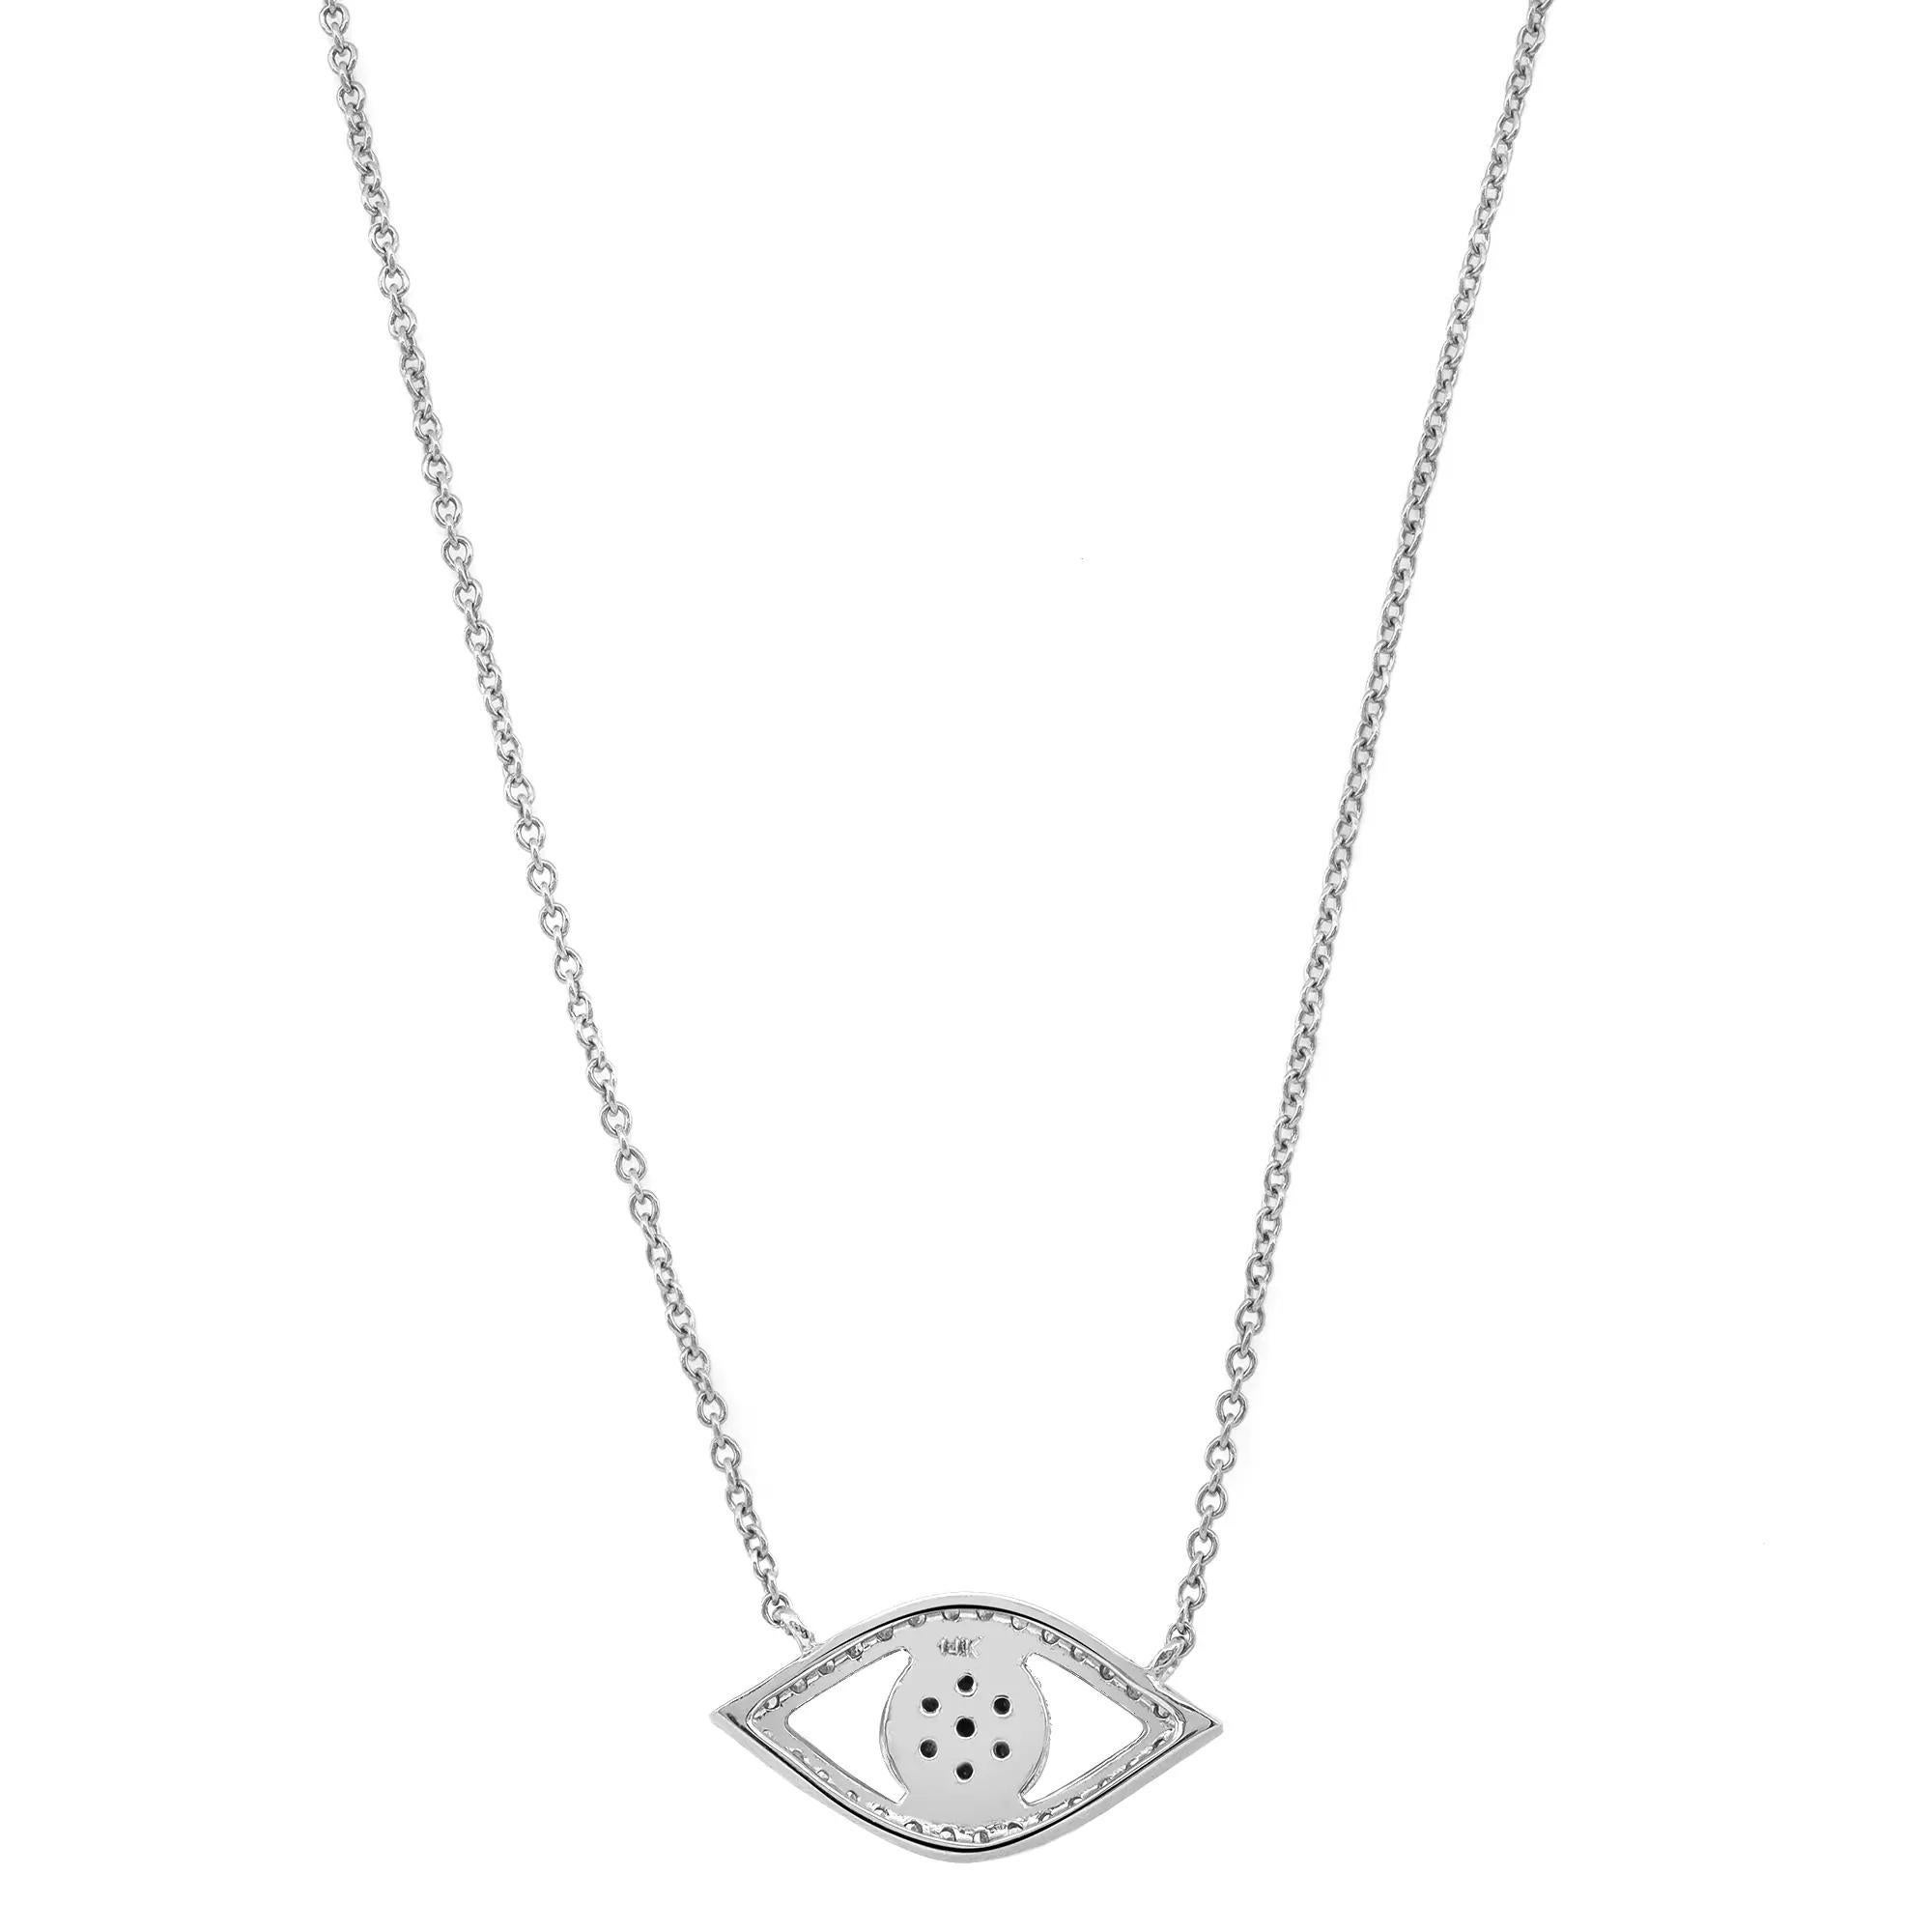 Round Cut Evil Eye Pave Diamond Pendant Necklace In 14K White Gold 0.18Cttw For Sale